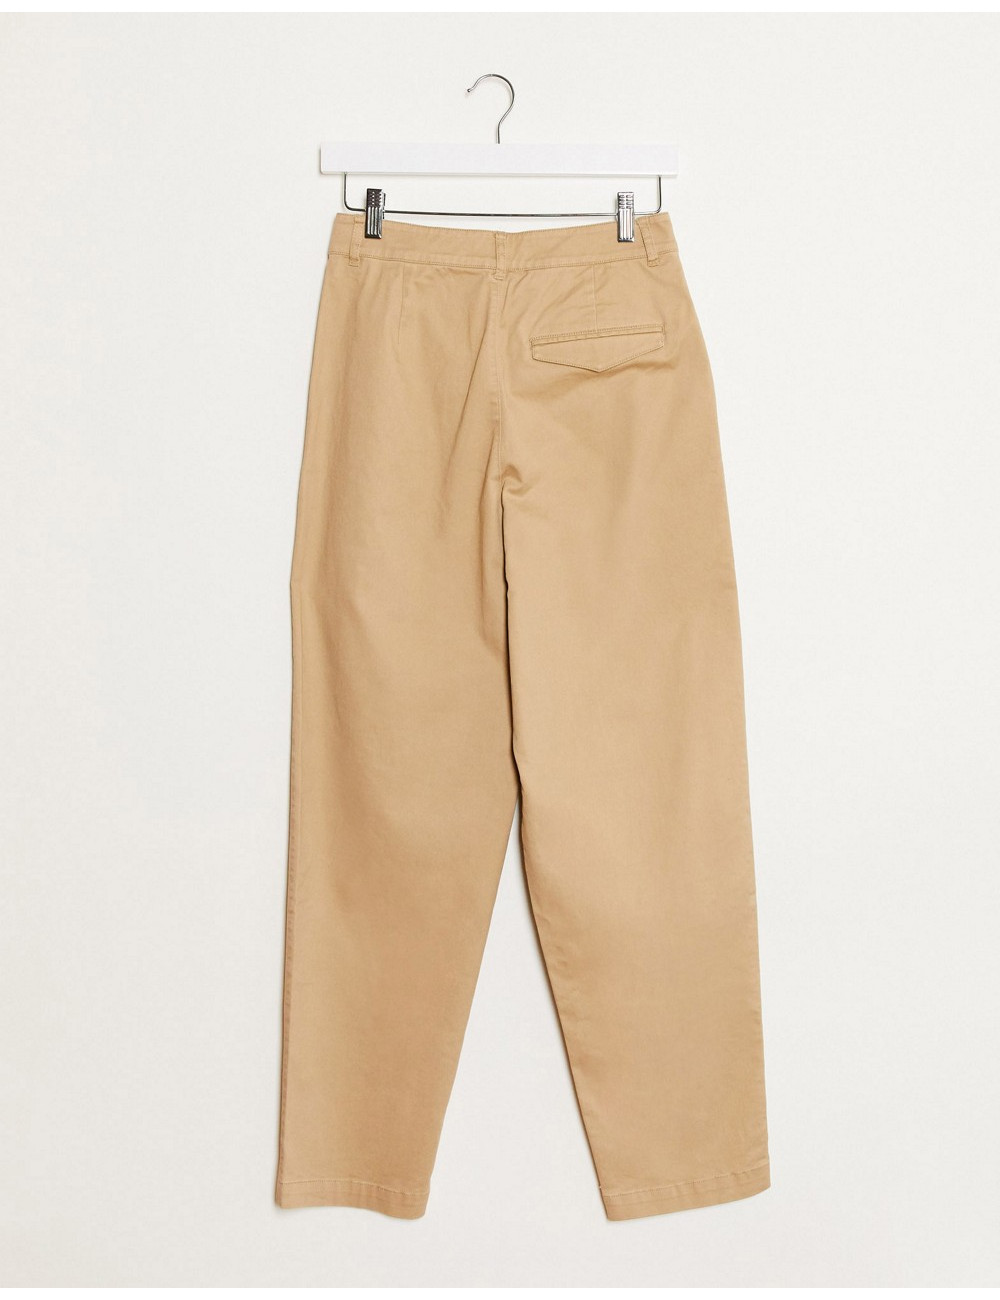 Mango button front trousers...